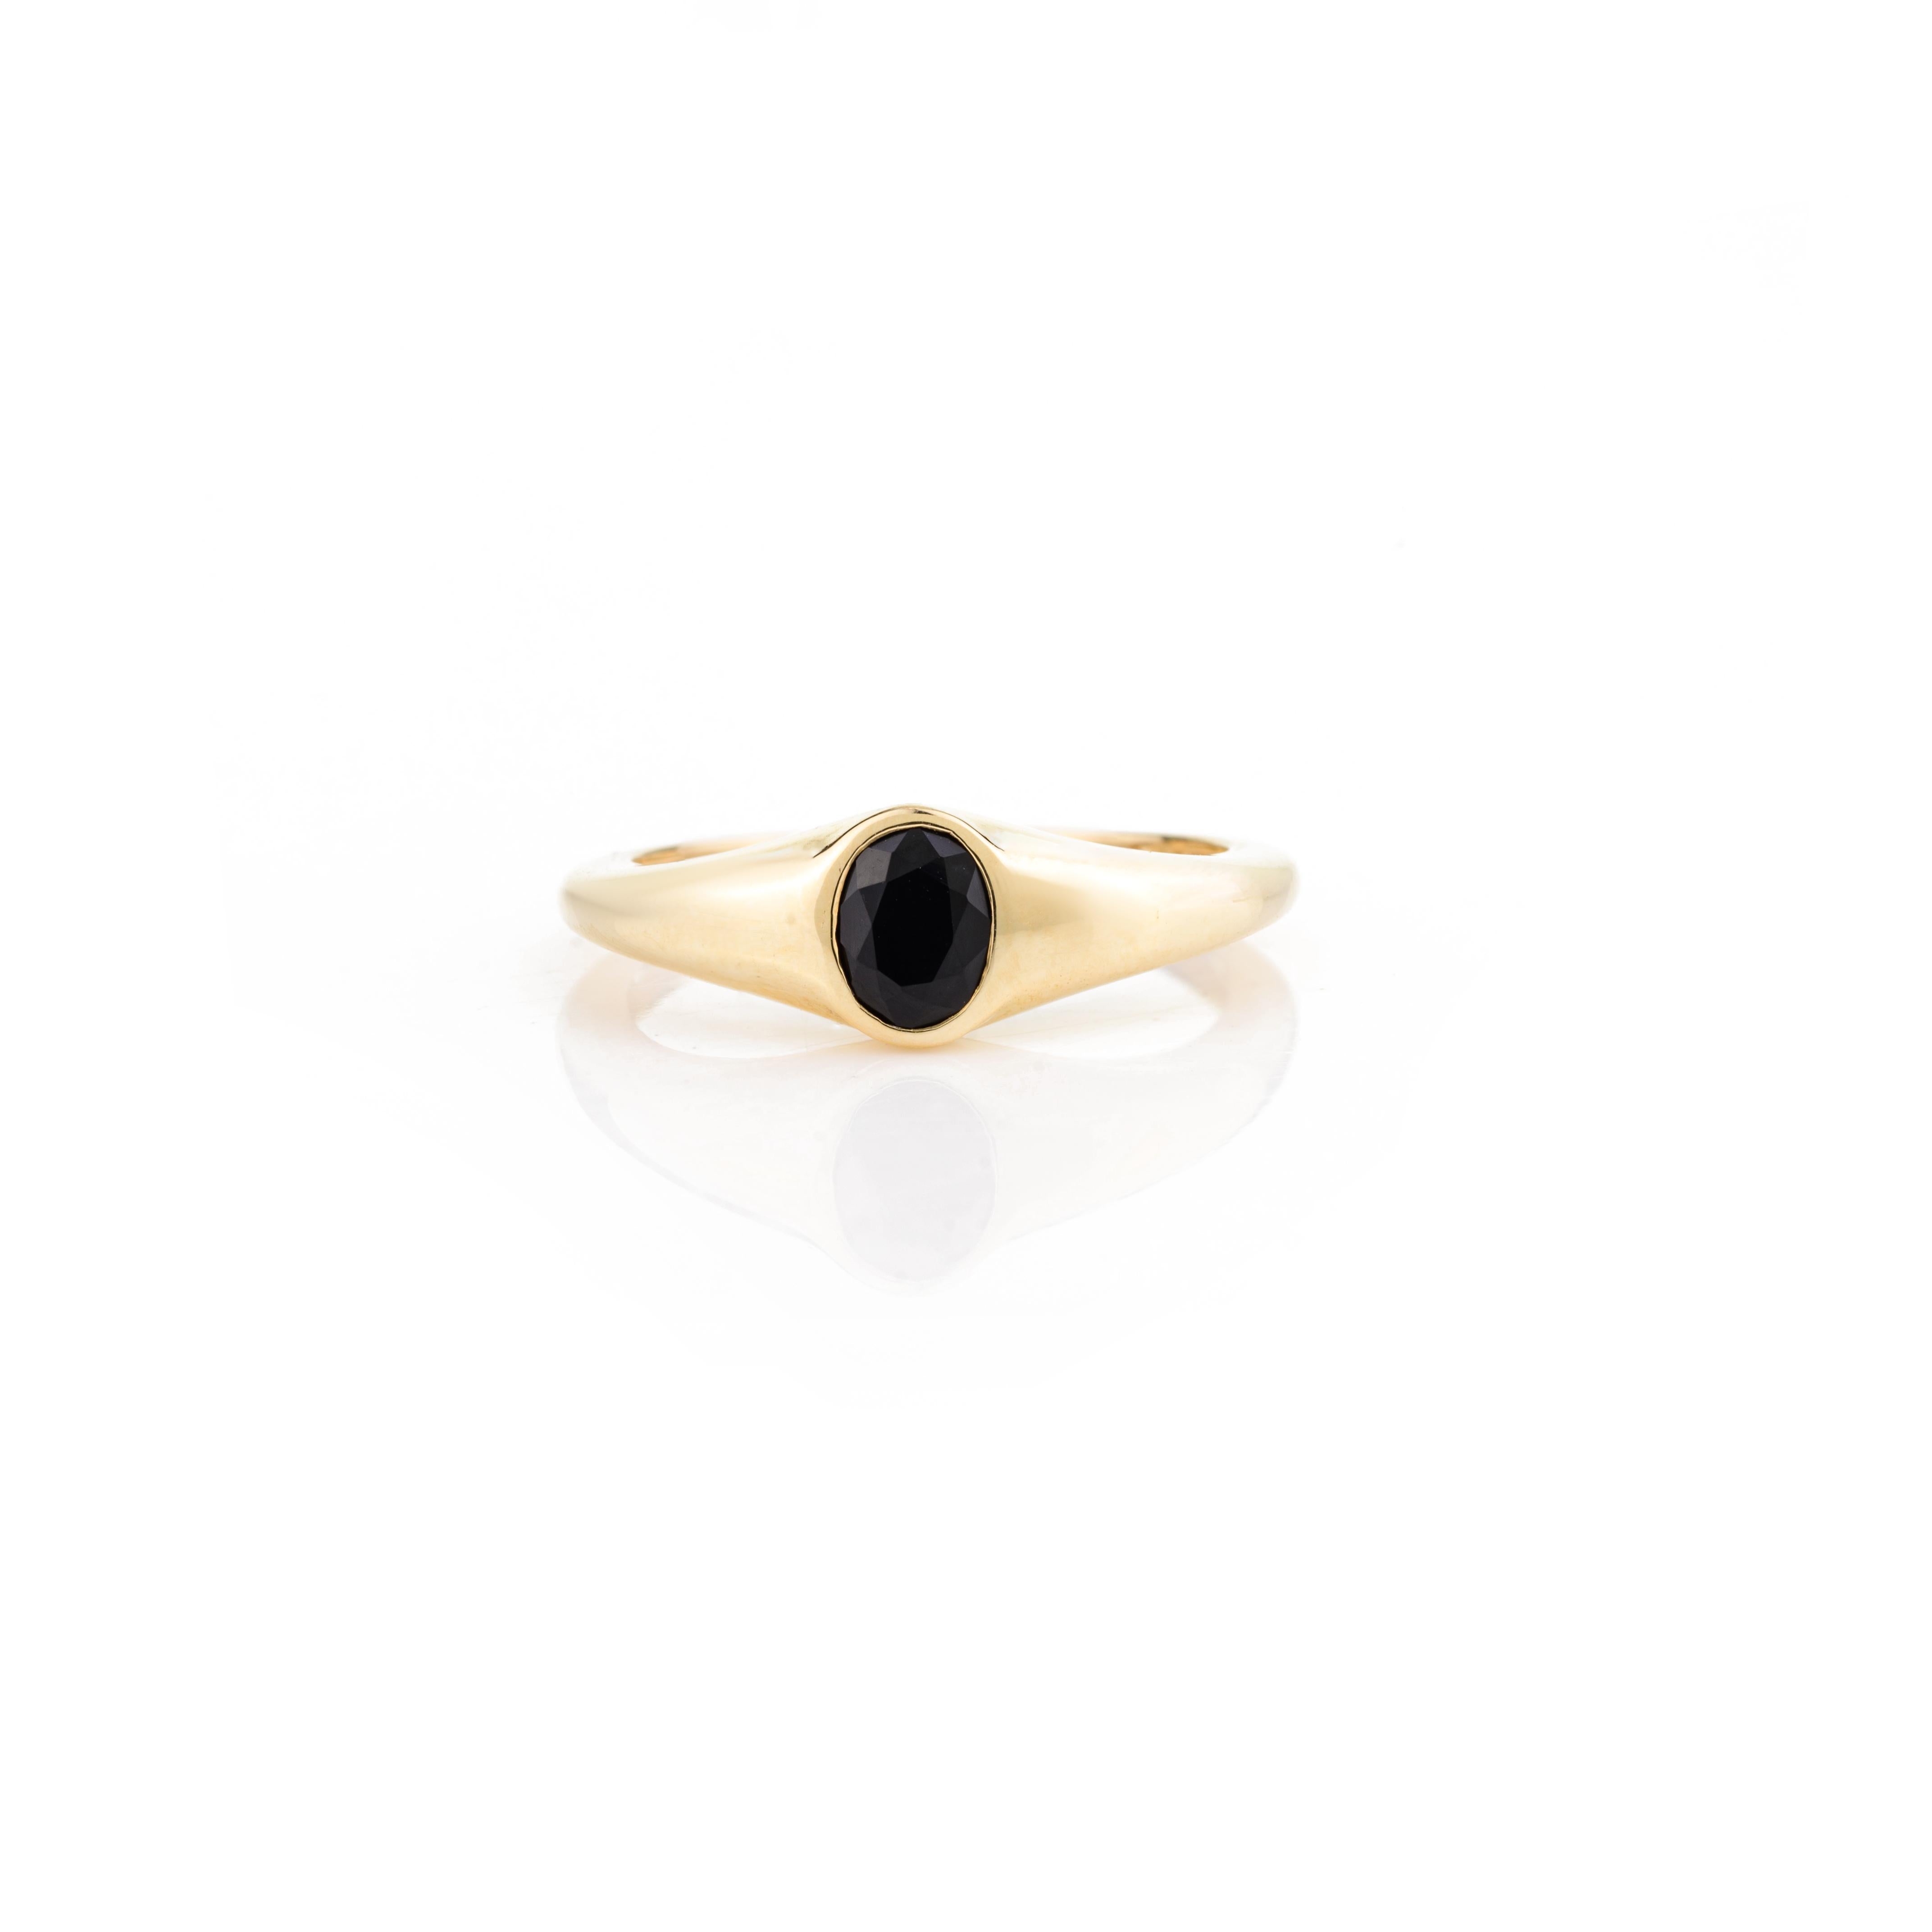 For Sale:  Unisex 14k Solid Yellow Gold Black Onyx Promise Everyday Ring 3